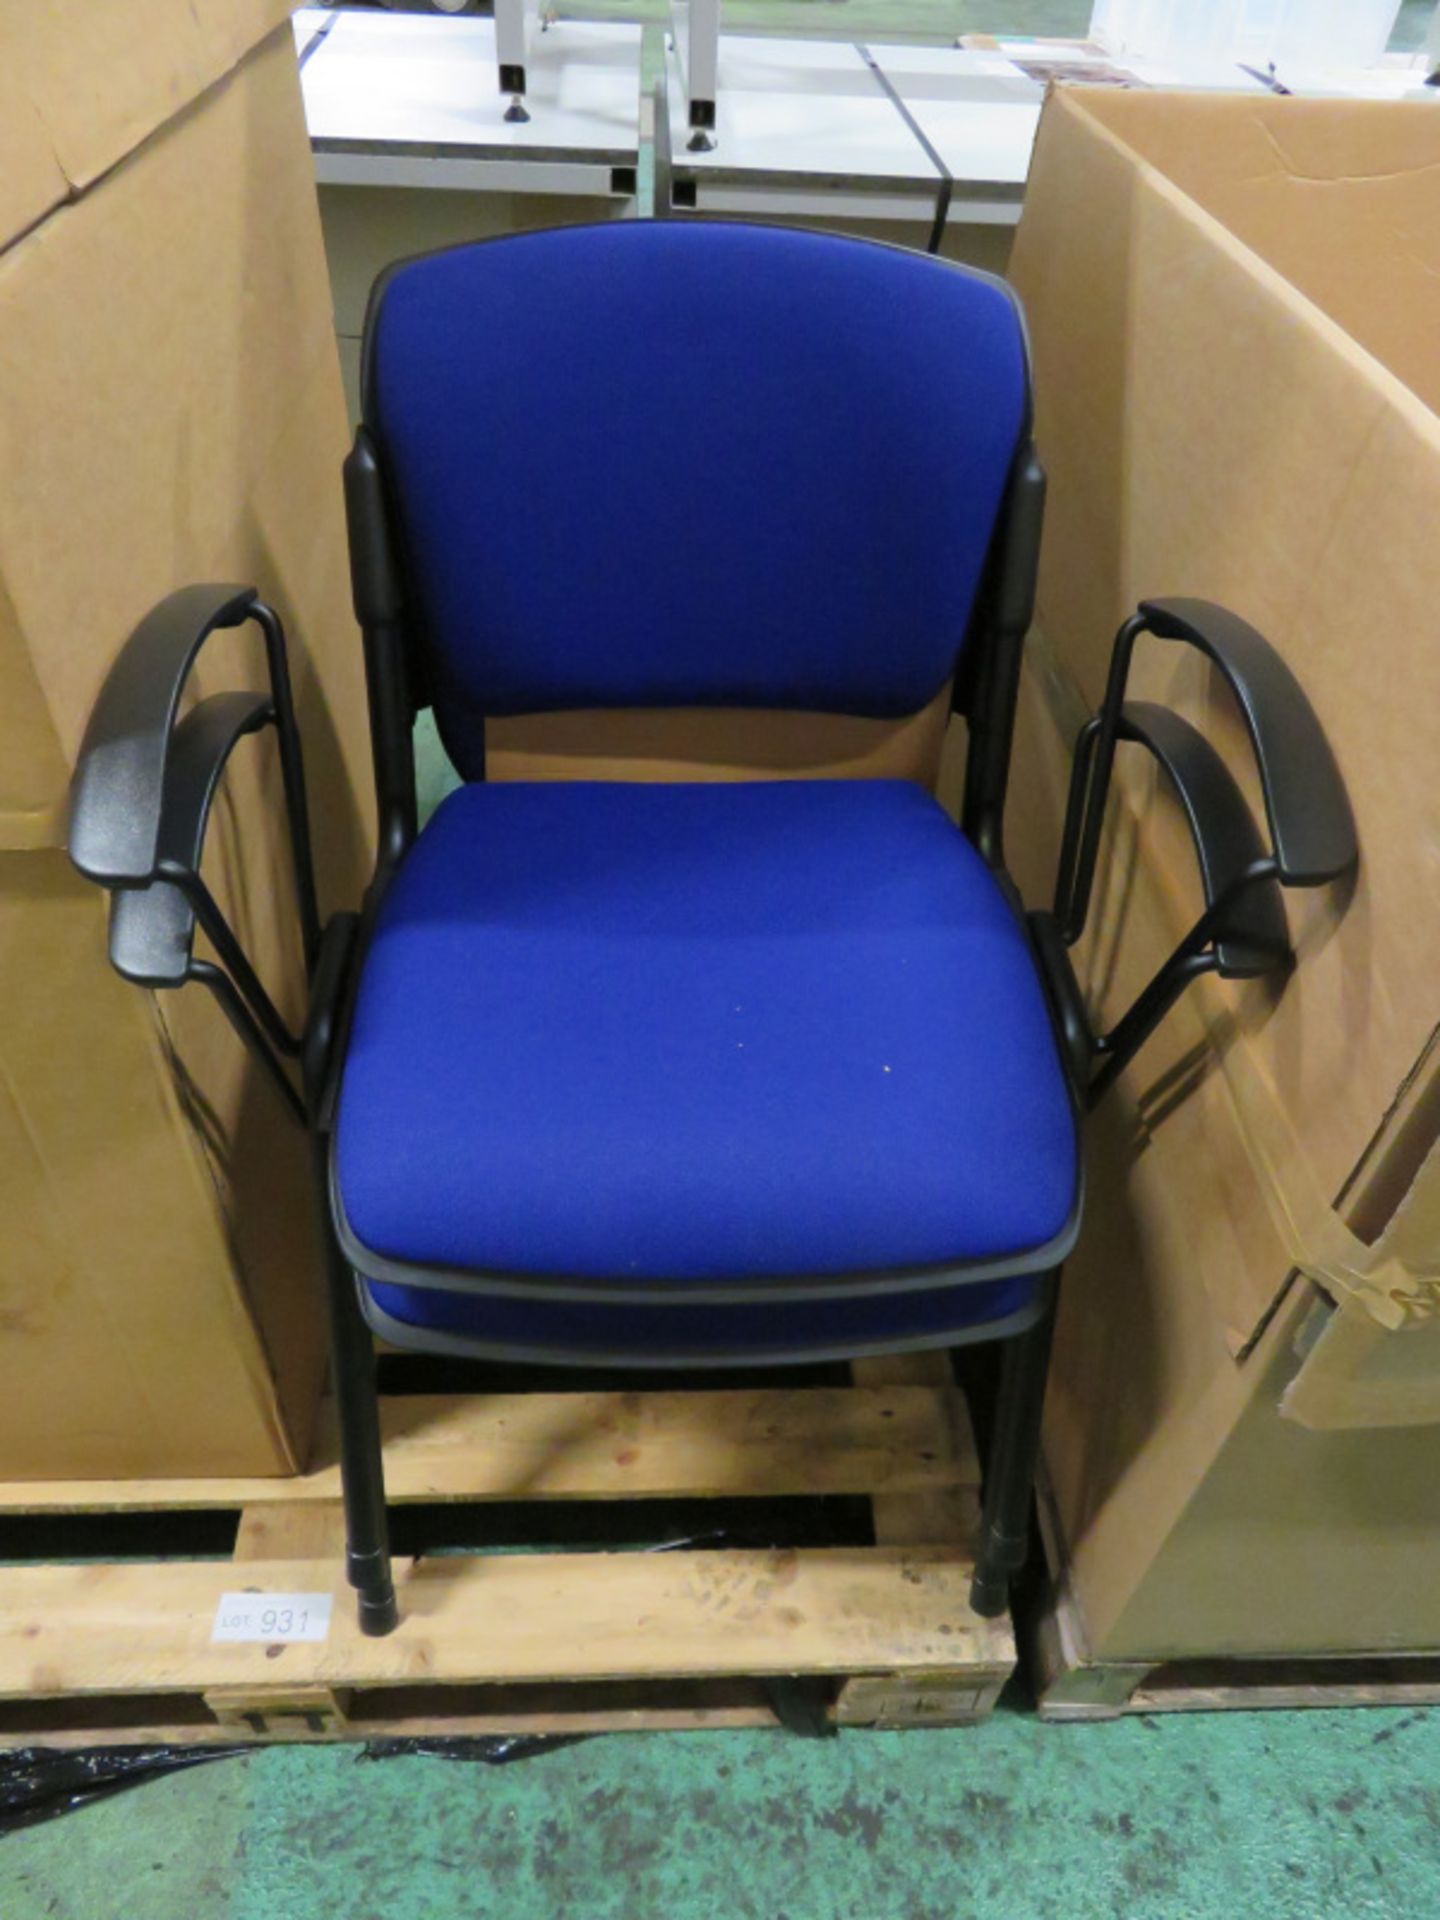 4x Blue Chairs - W660mm x D550mm x H800mm - Image 2 of 2